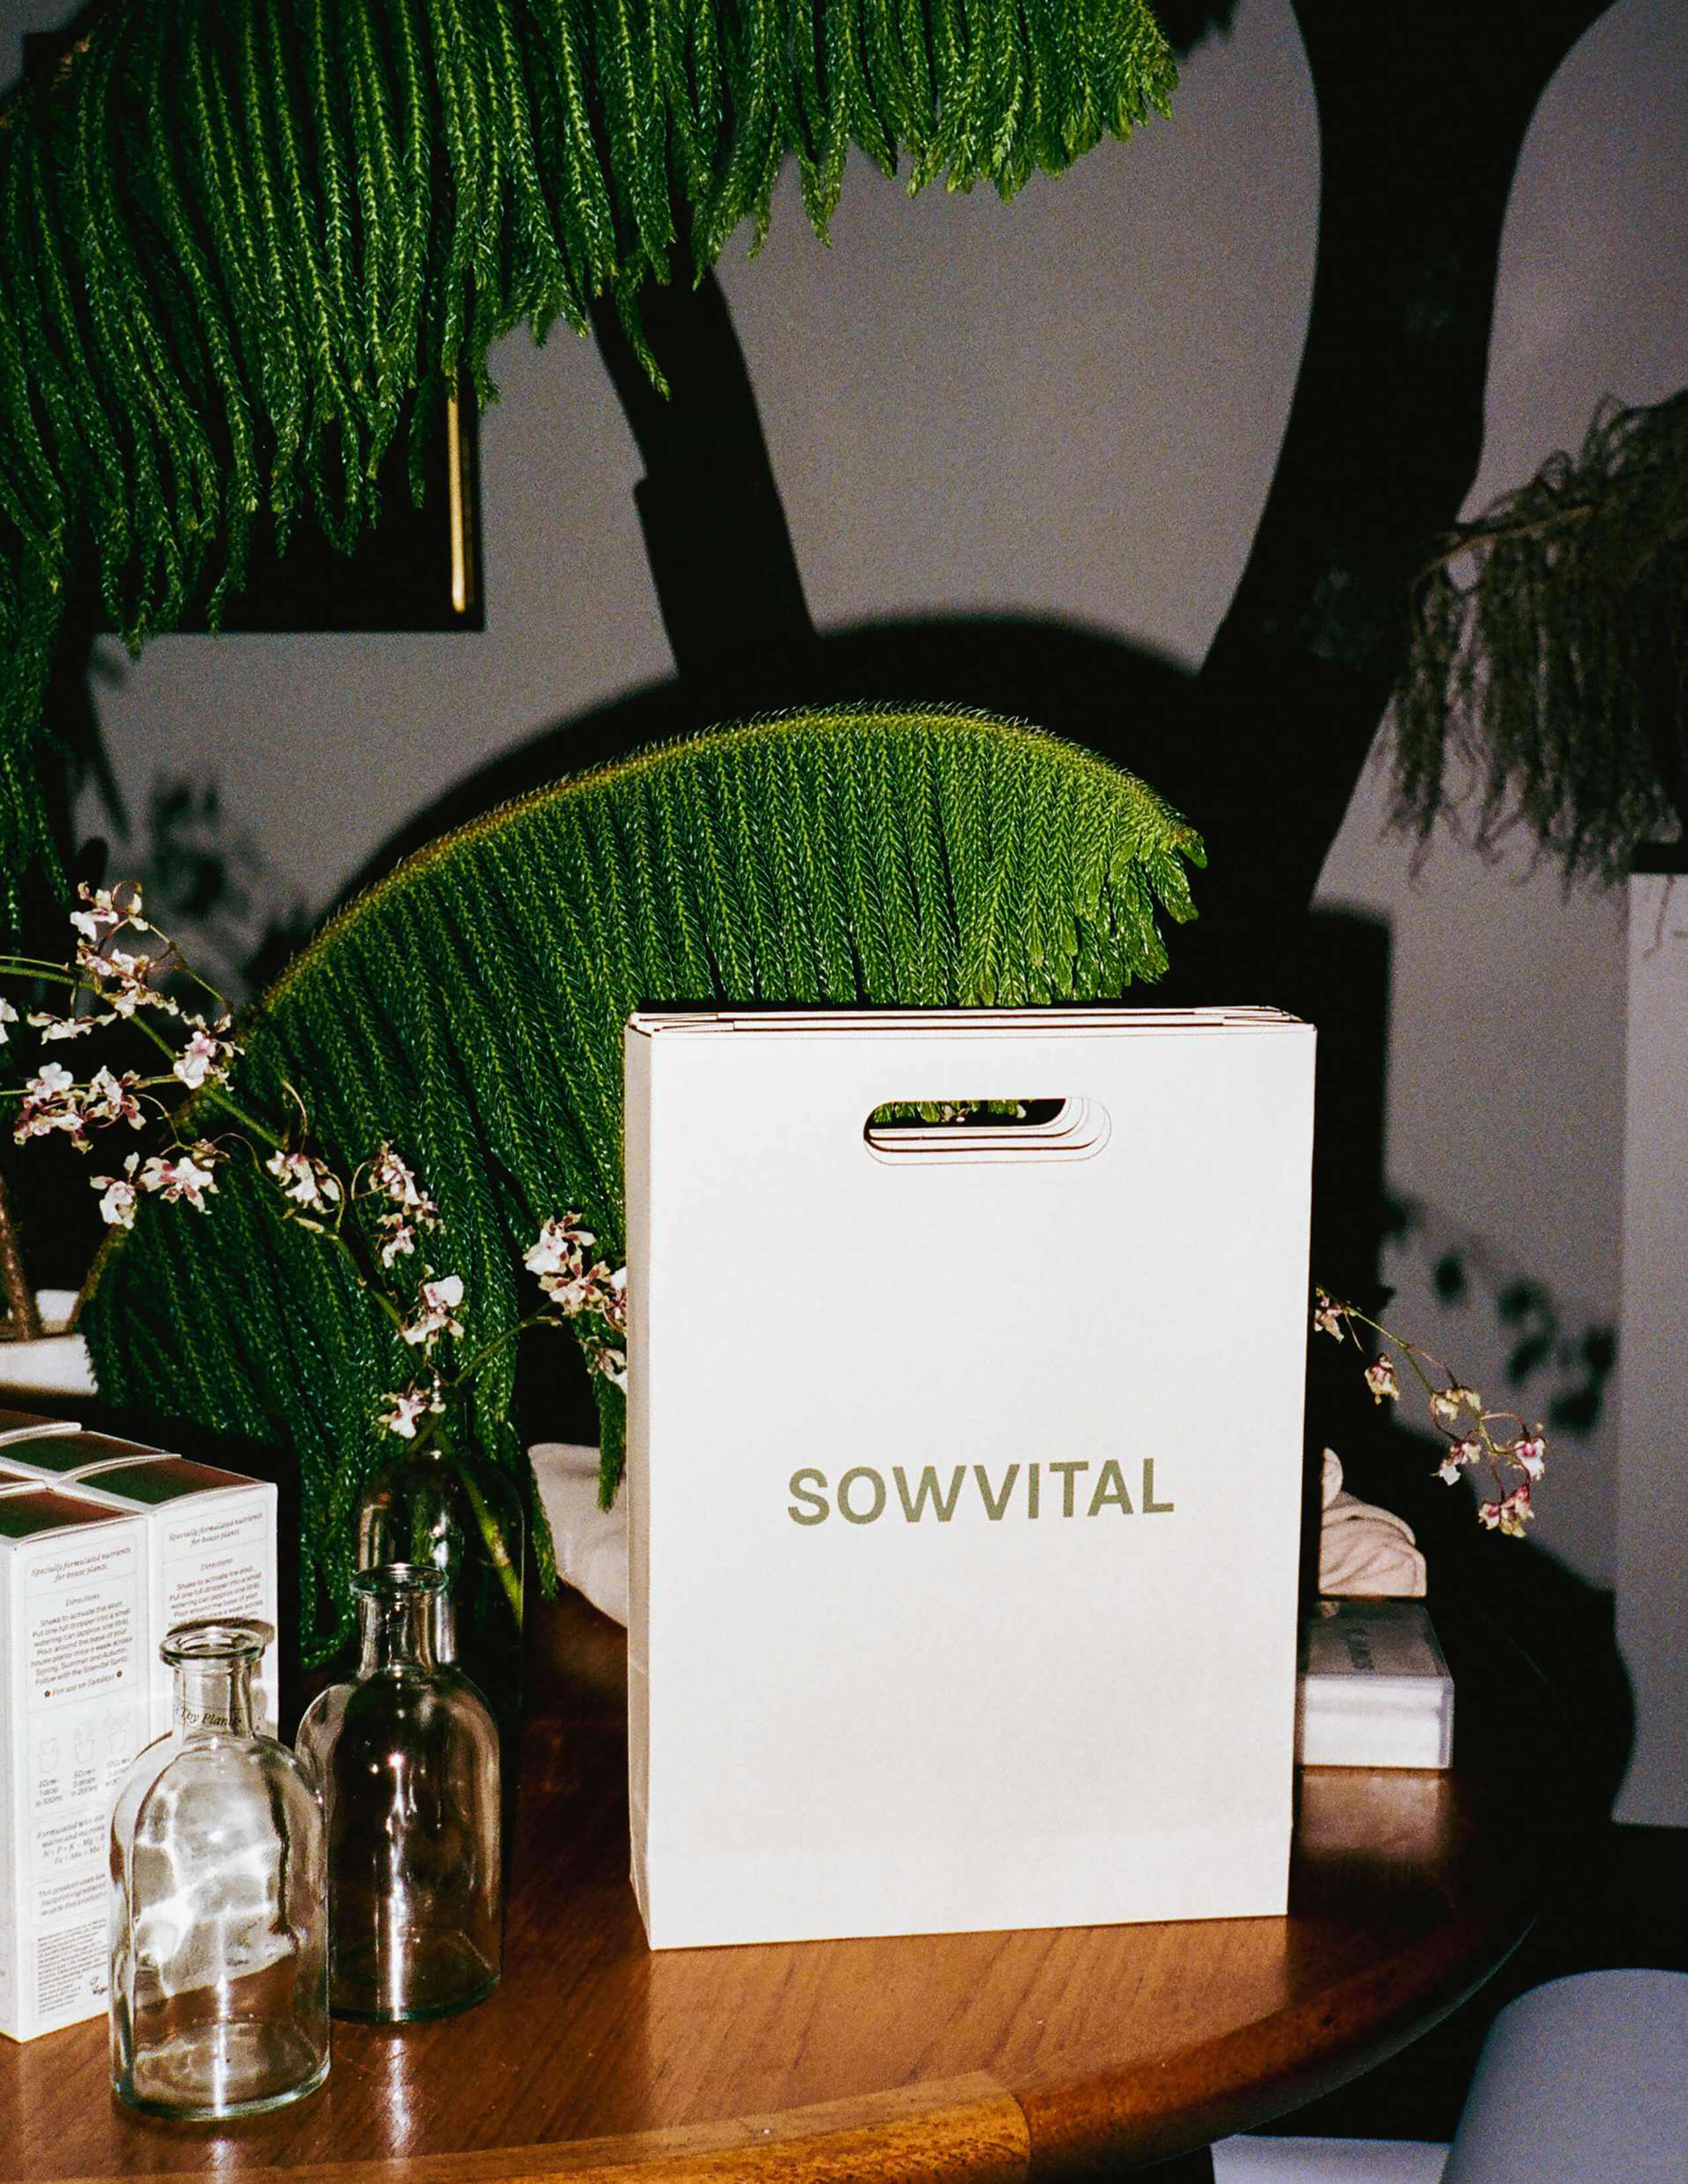 A gifting bag labelled with Sowvital next to glass bottles, house plant products and some plants, and flowers on the wooden table.